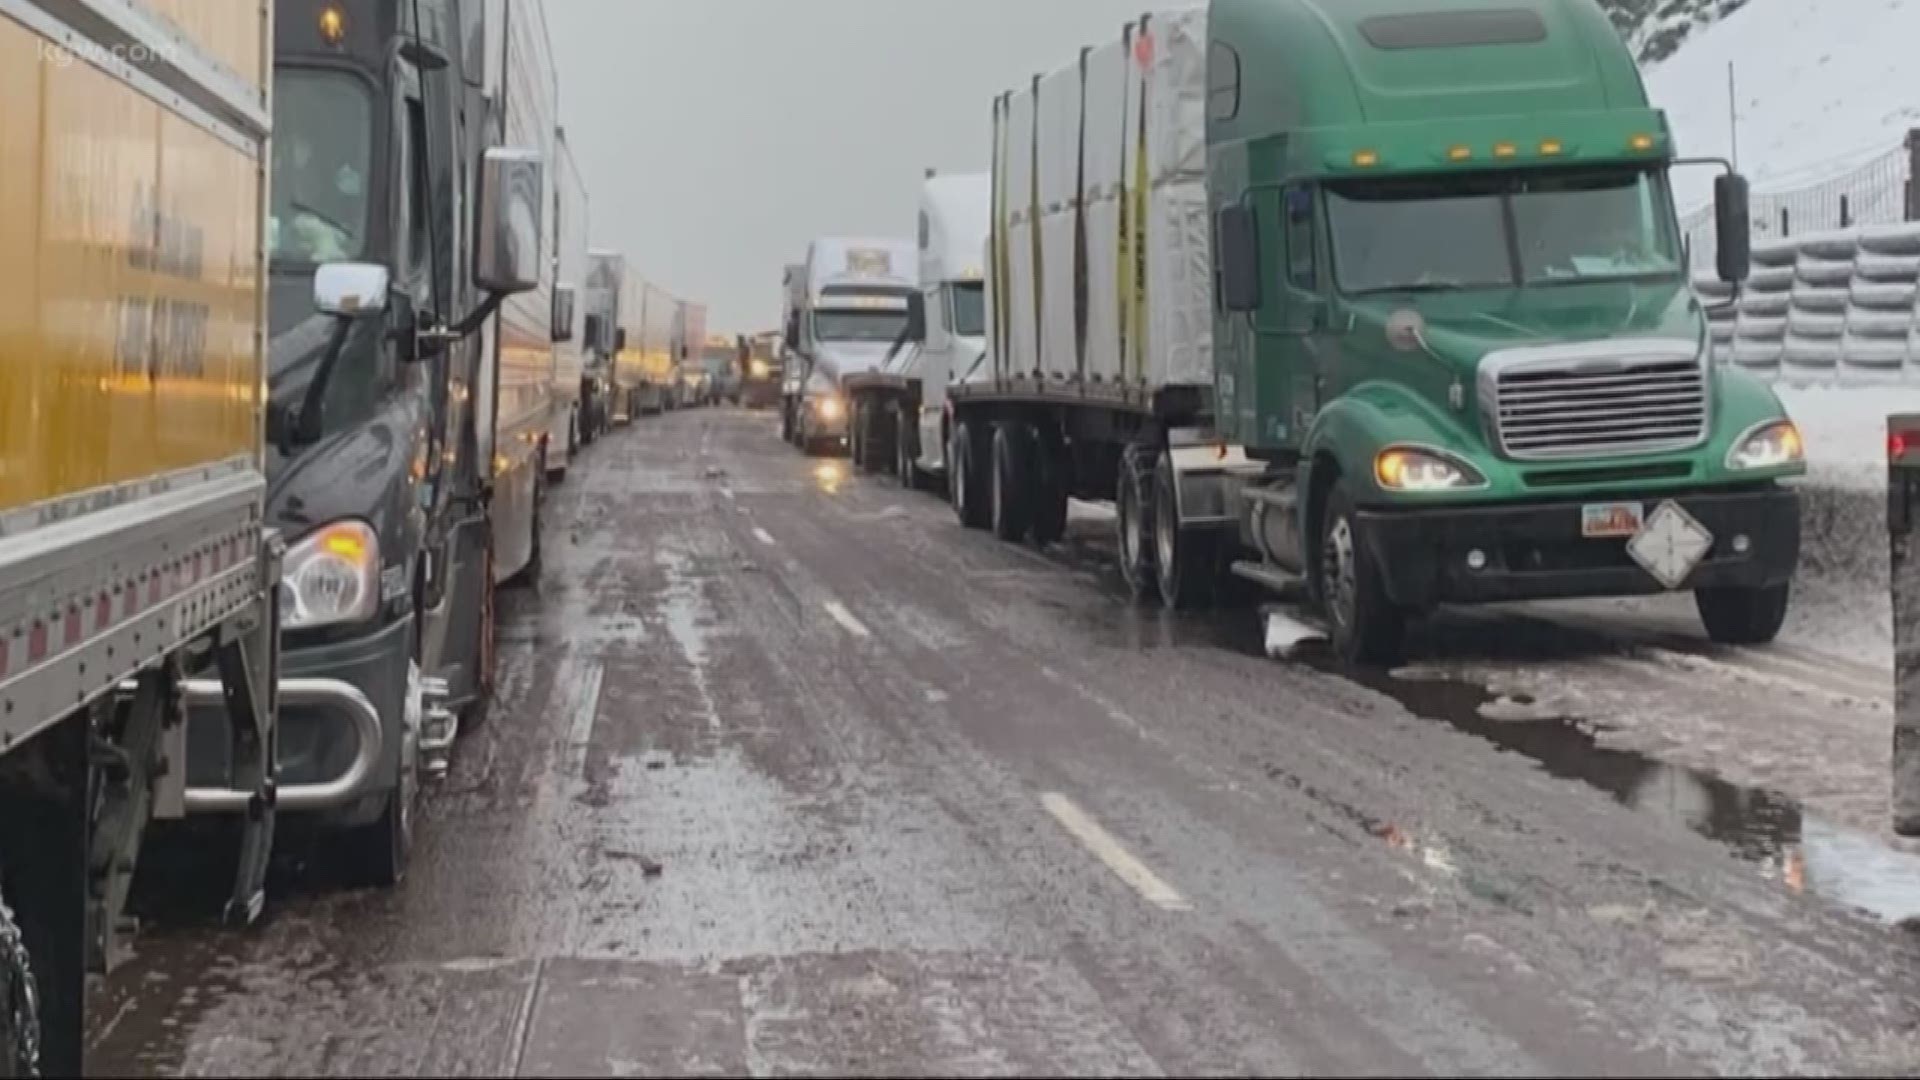 Drivers were stuck in the gorge for over 12 hours after crashes closed I-84.